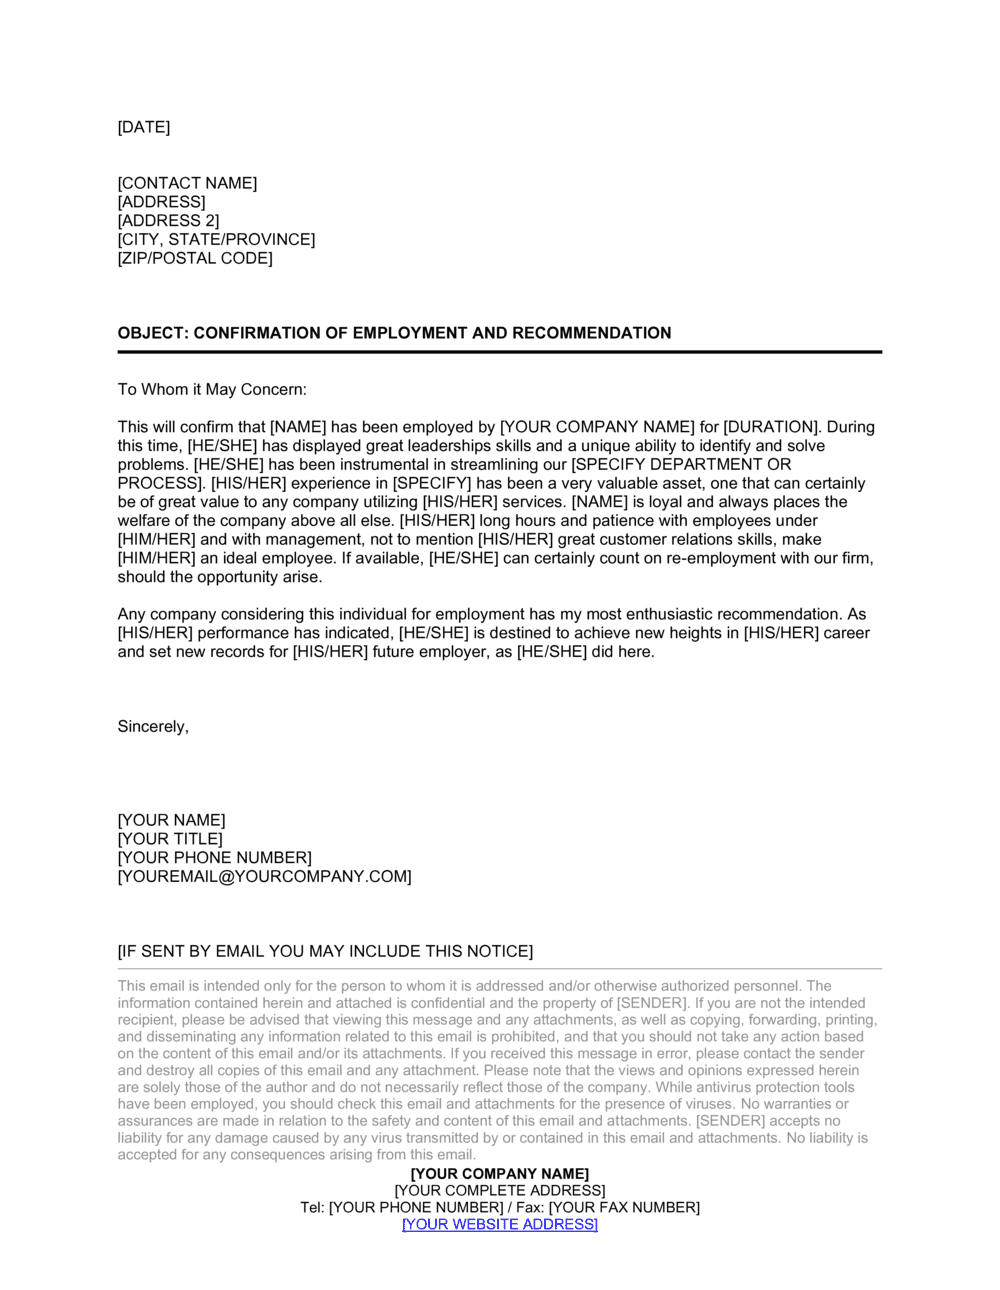 Sample Letter Of Recommendation For Director Position from templates.business-in-a-box.com